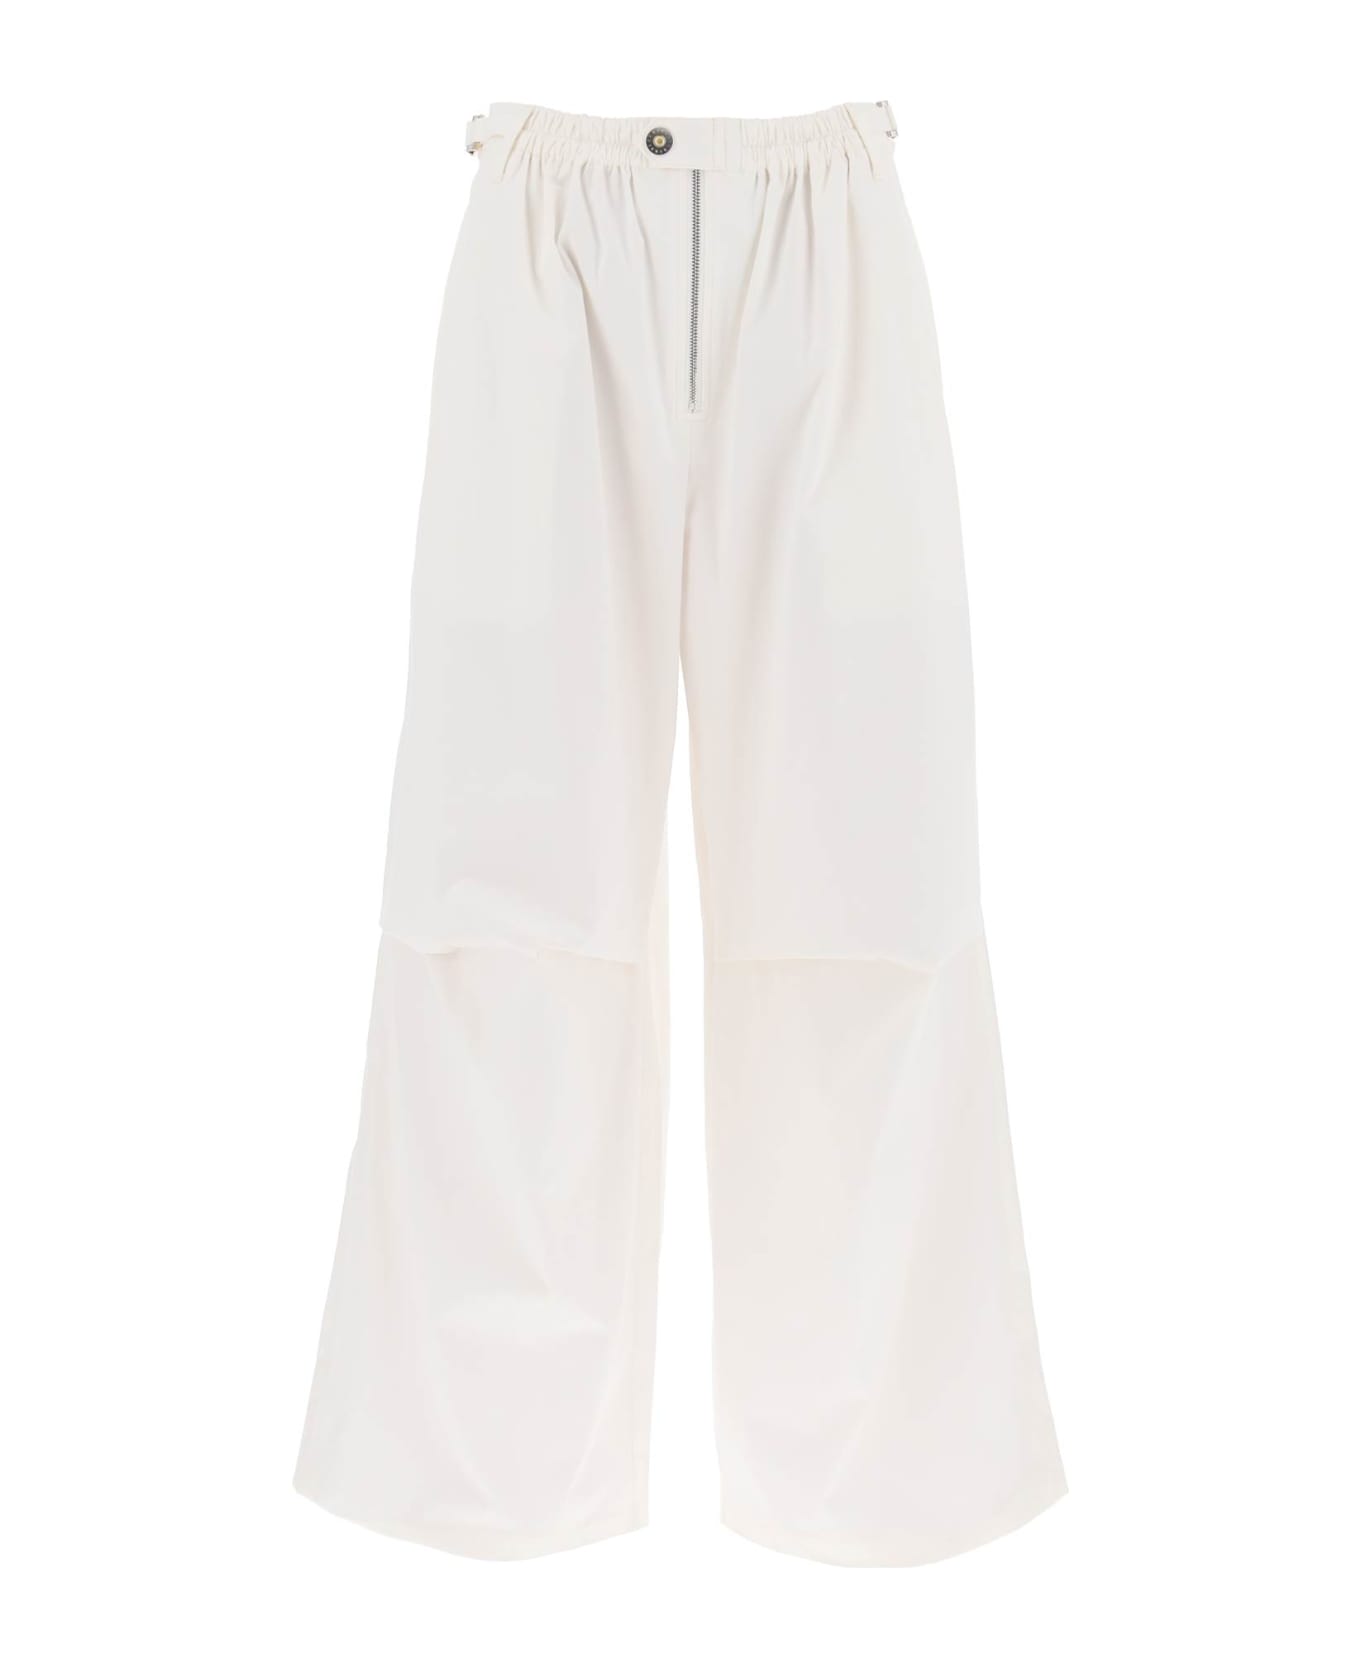 Dion Lee Oversized Parachute Pants - IVORY (White)